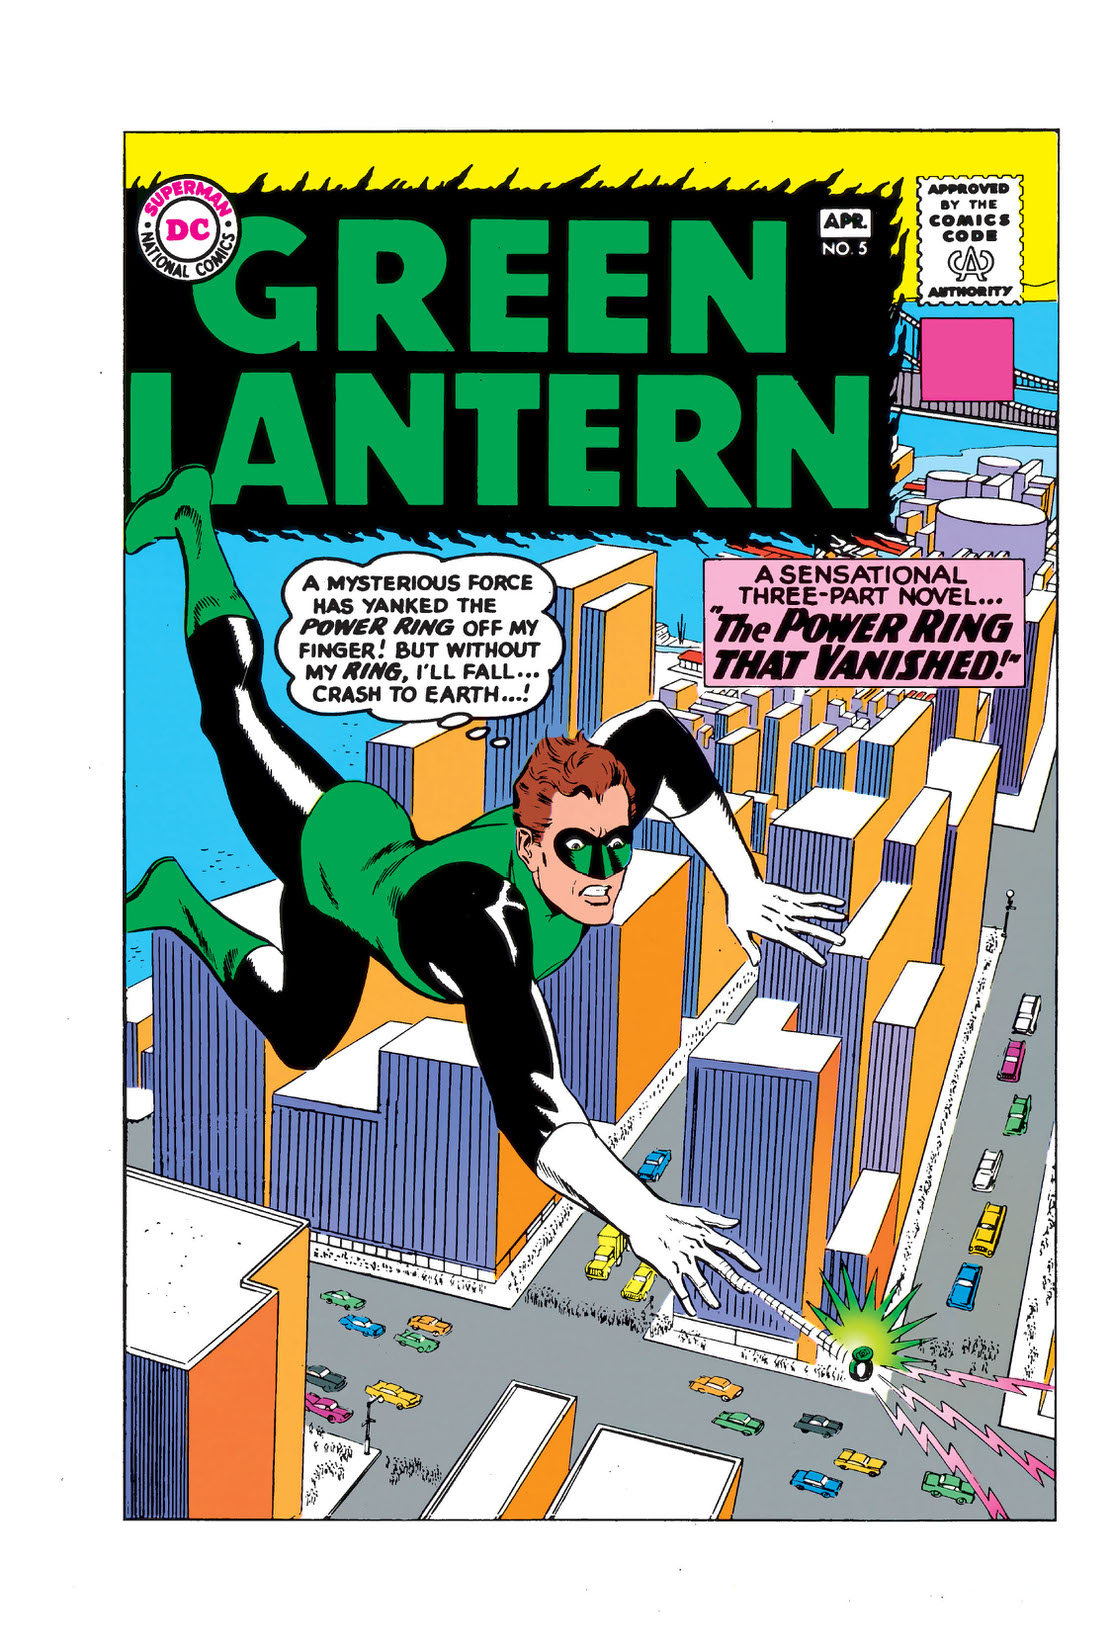 Green Lantern (1960-) #5 preview images